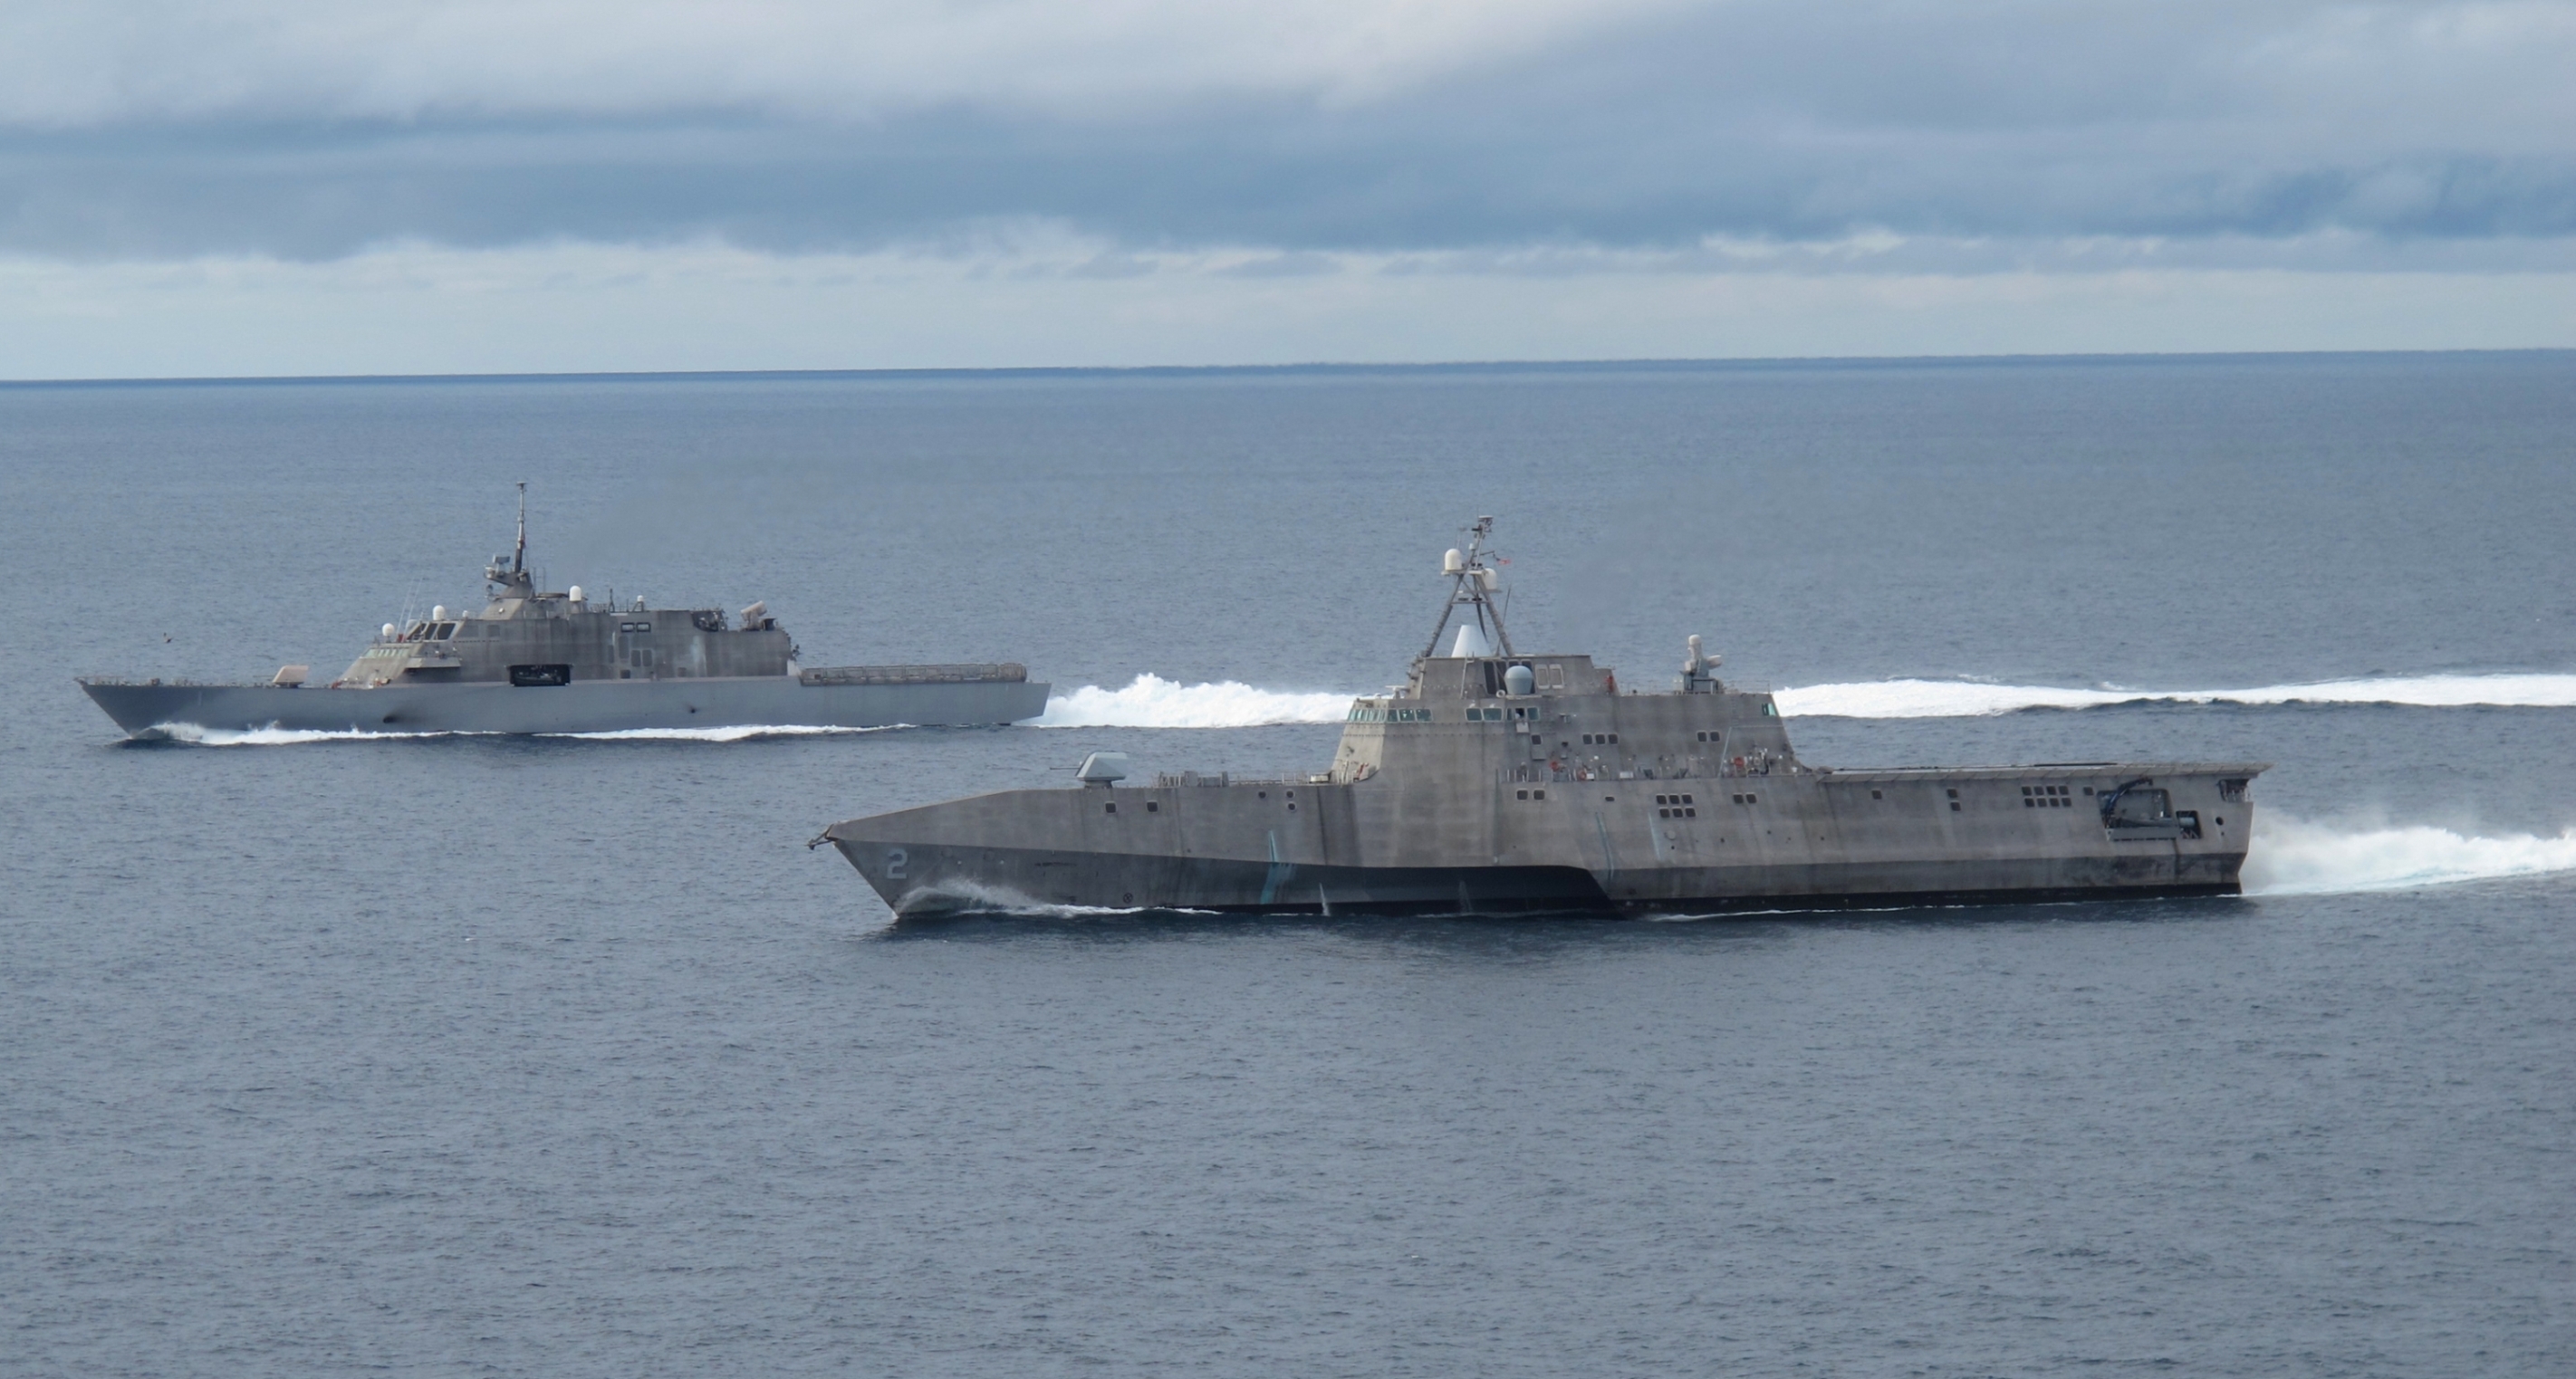 http://news.usni.org/wp-content/uploads/2014/01/lcs2_lcs1.jpg